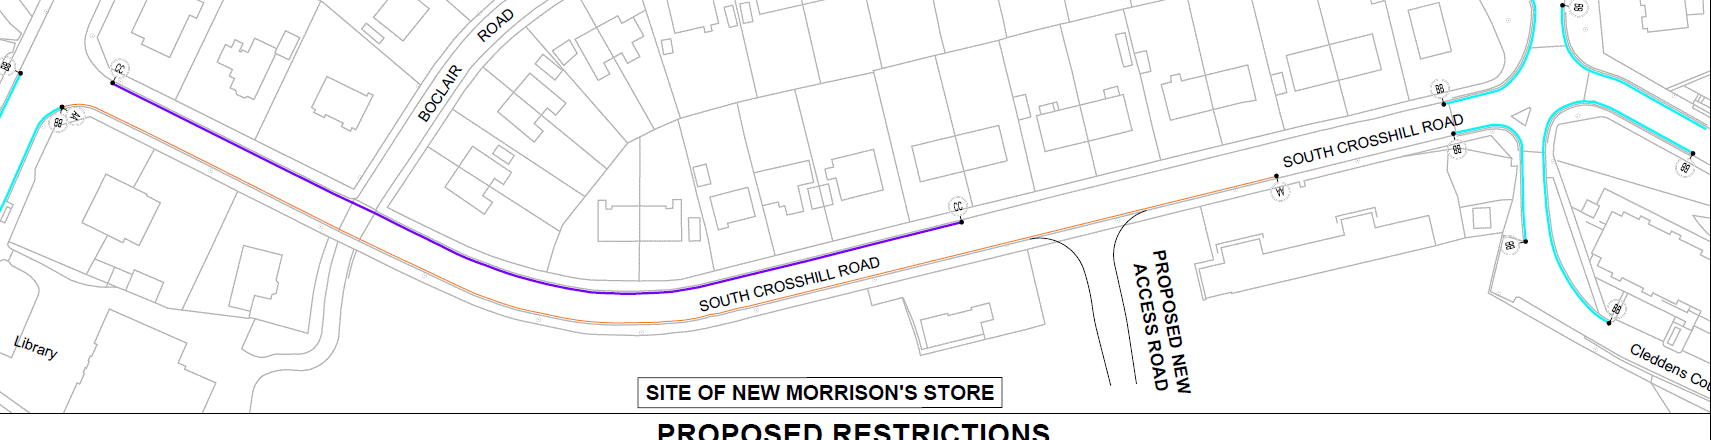 map illustration showing the proposed restrictions at the site of the new morrisons store